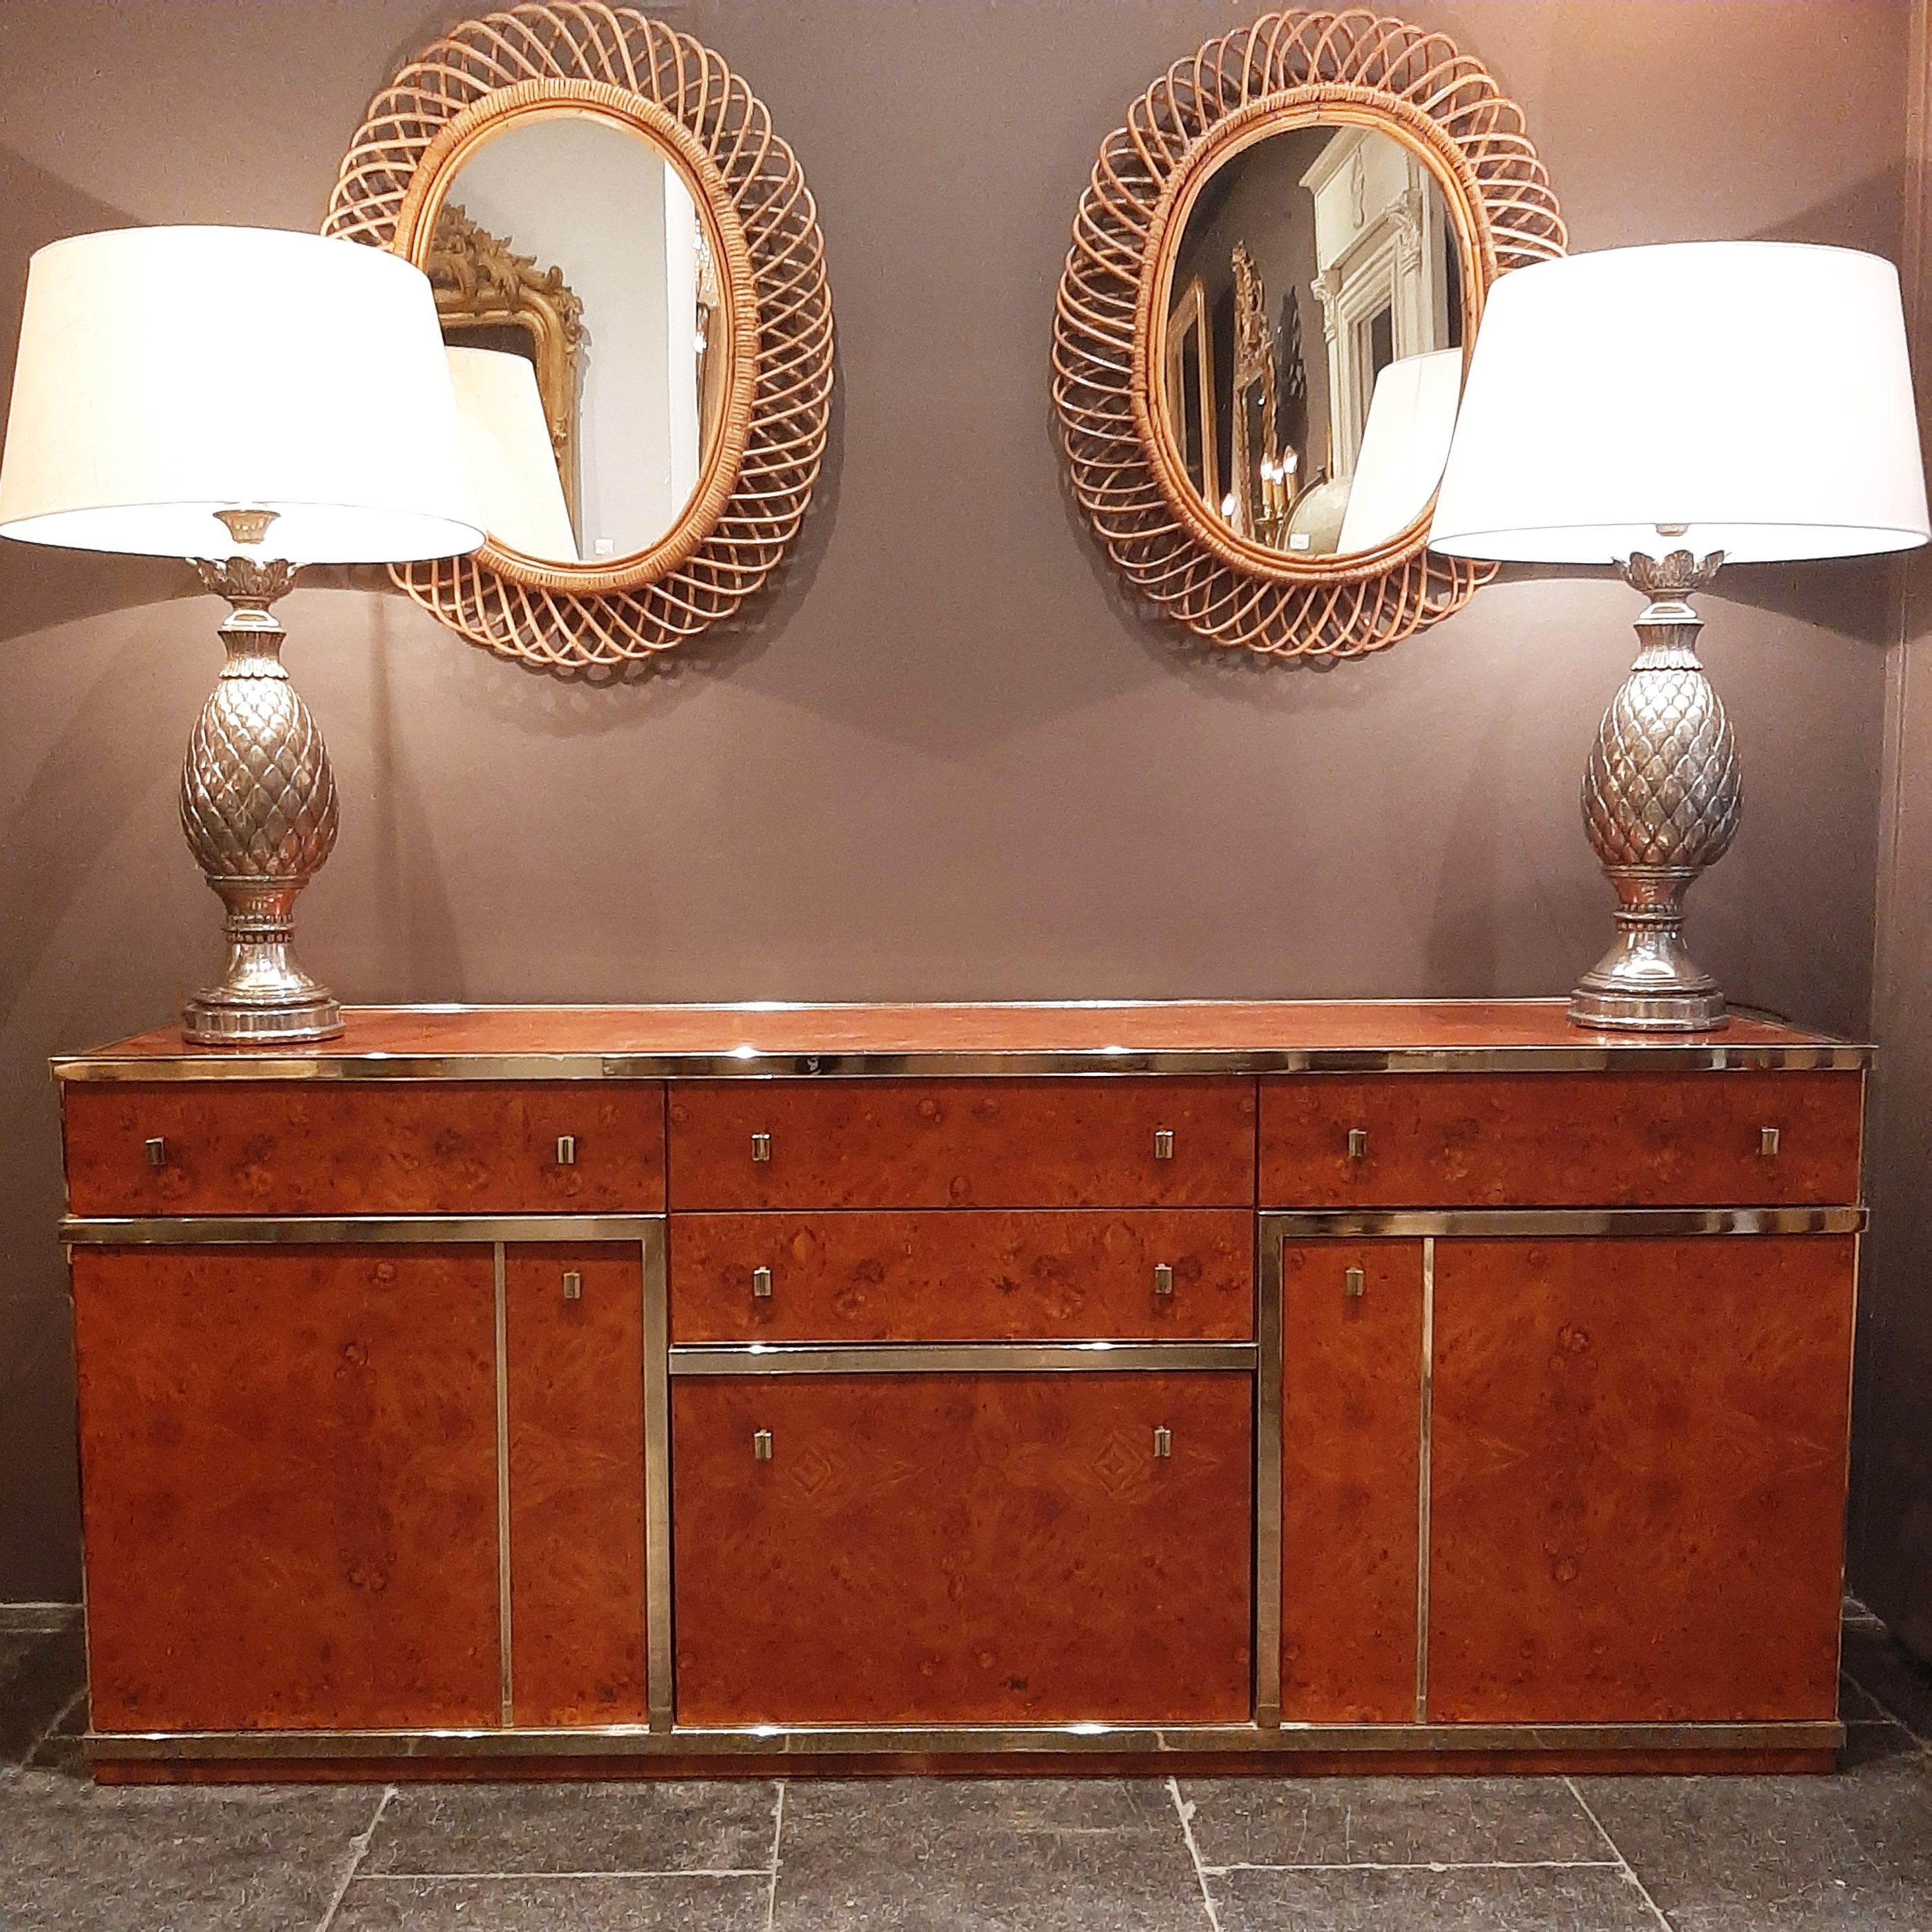 Midcentury Willy Rizzo Burl Wood and Chrome Credenza, Italy, 1970s For Sale 2